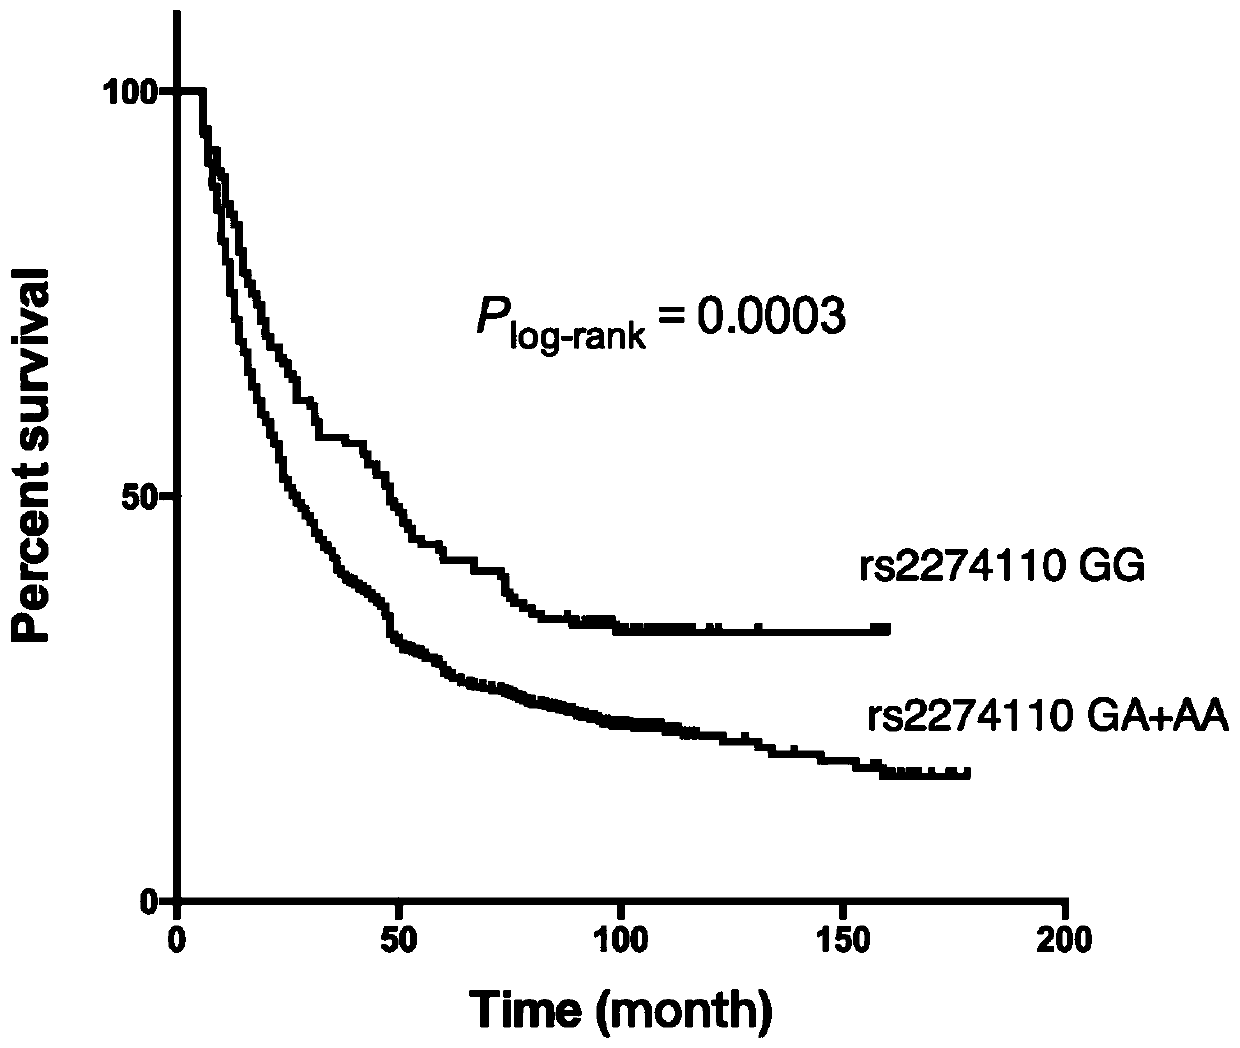 A SNP marker associated with the prognosis of patients with esophageal cancer and its application